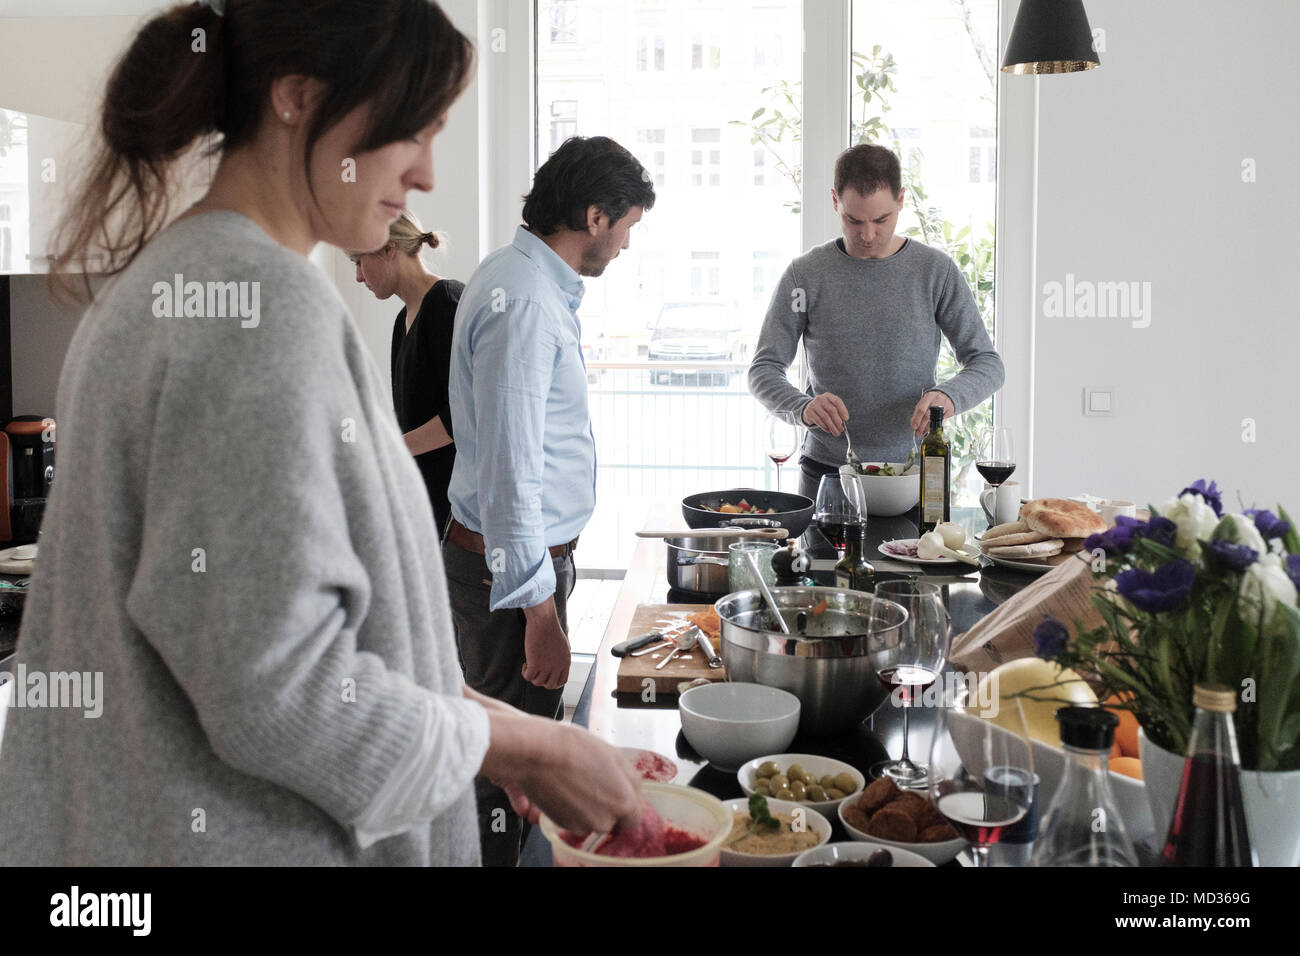 Group of friends casually snacking on a selection of food while laughing and enjoying themselves. Stock Photo